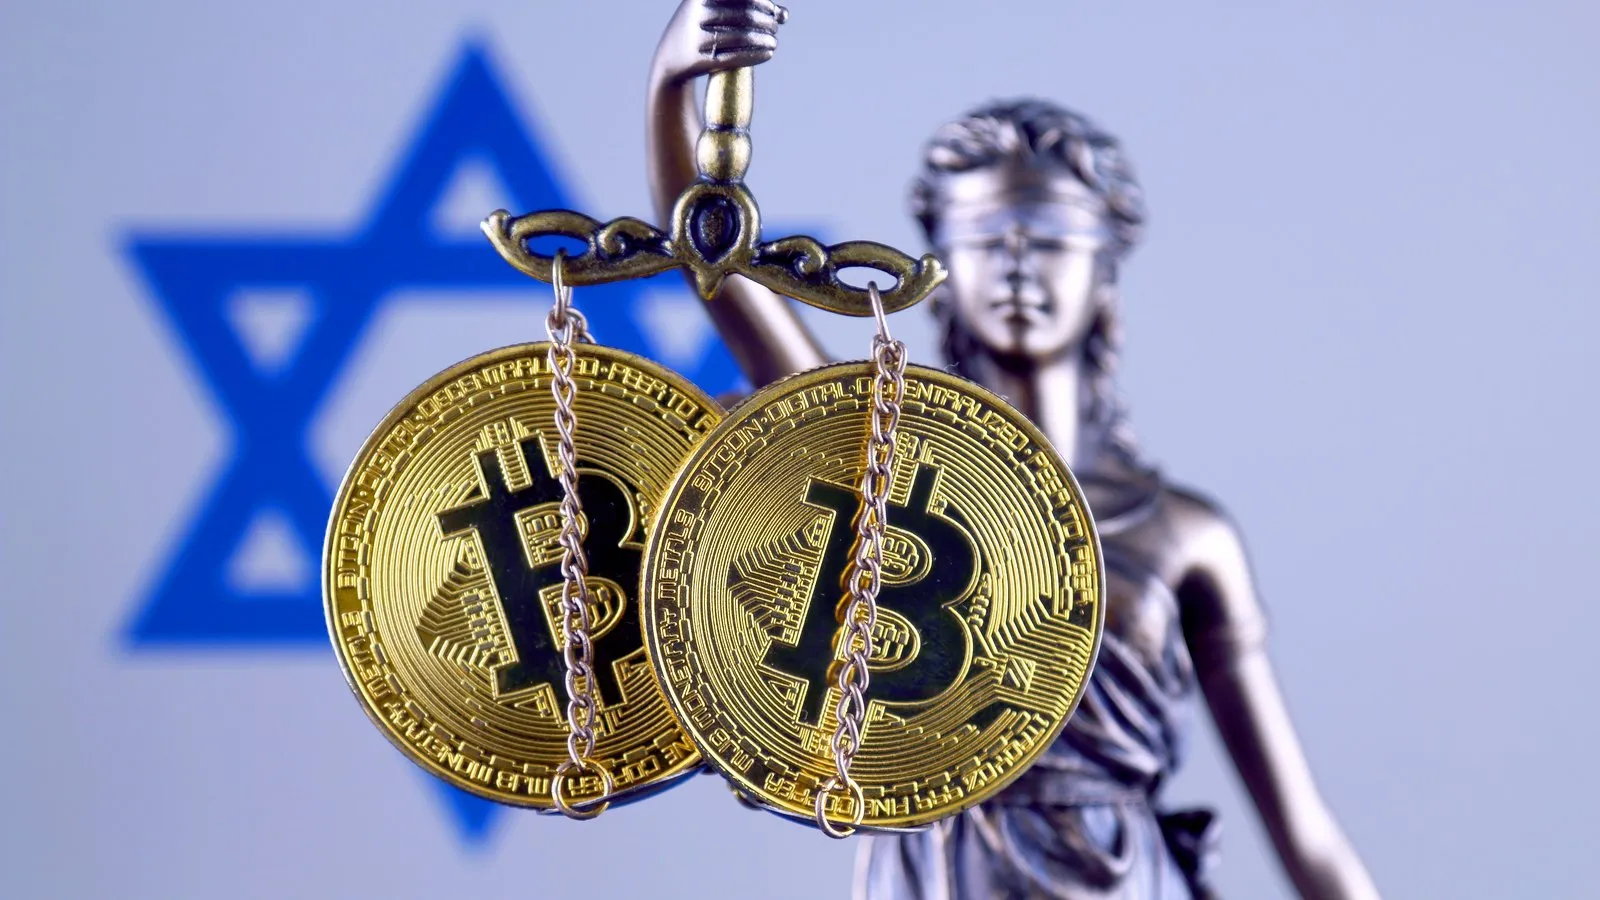 Crypto wallets in Israel blocked. Image: Shutterstock.